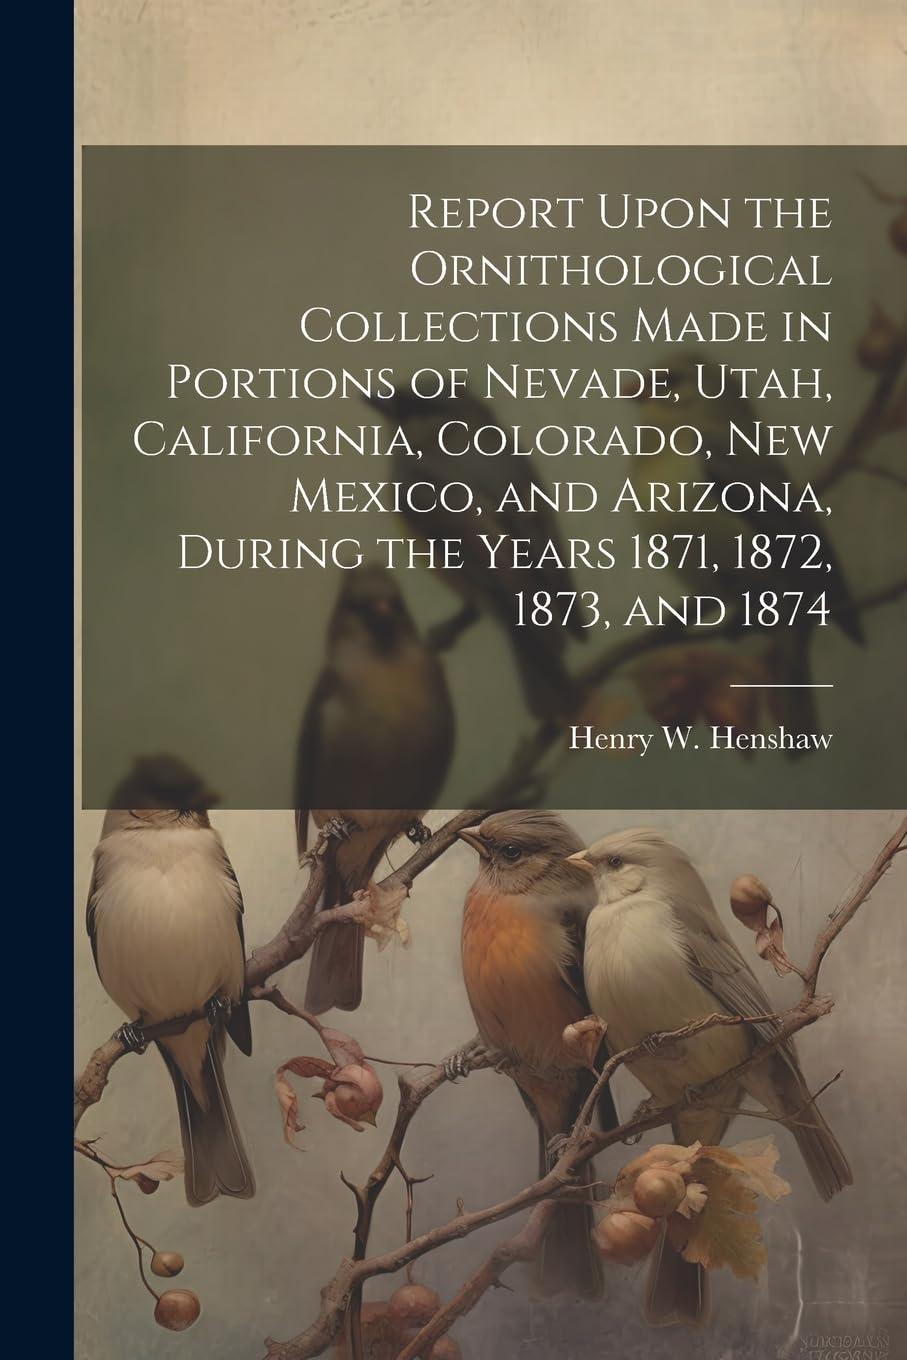 report upon the ornithological collections made in portions of nevade utah california colorado new mexico and